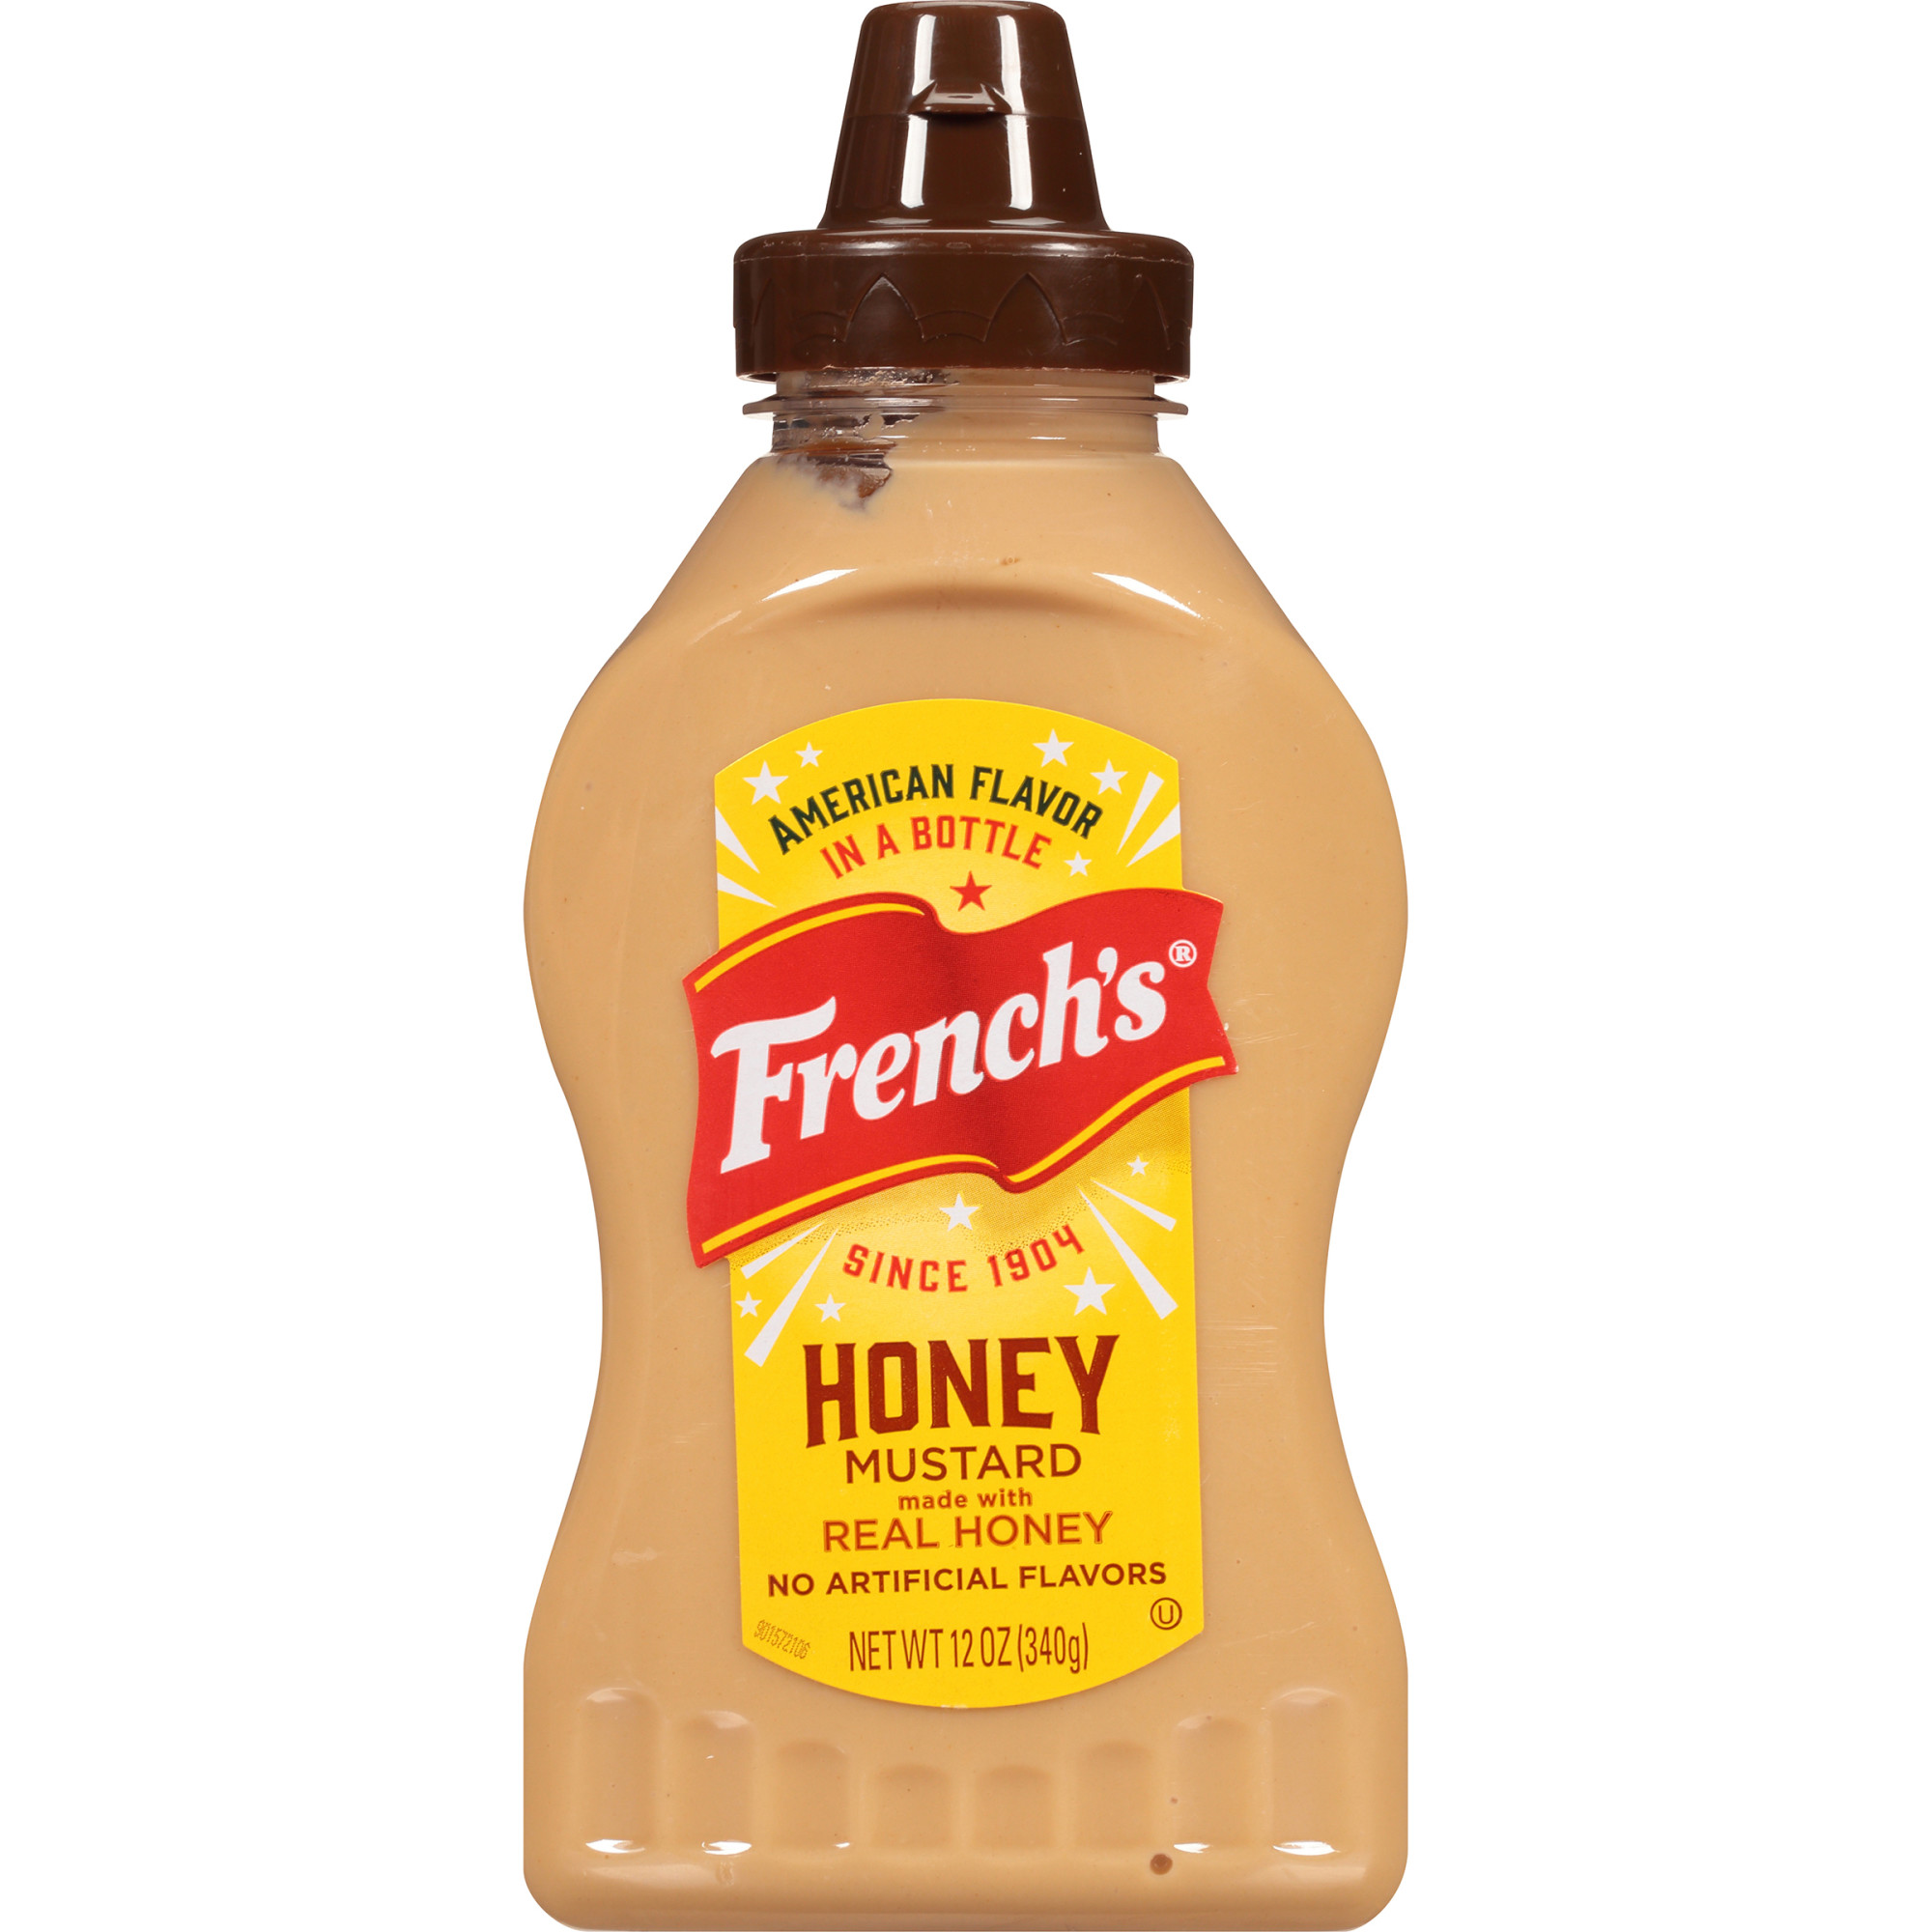 French's No Artificial Flavors Honey Mustard, 12 oz Bottle - image 1 of 12